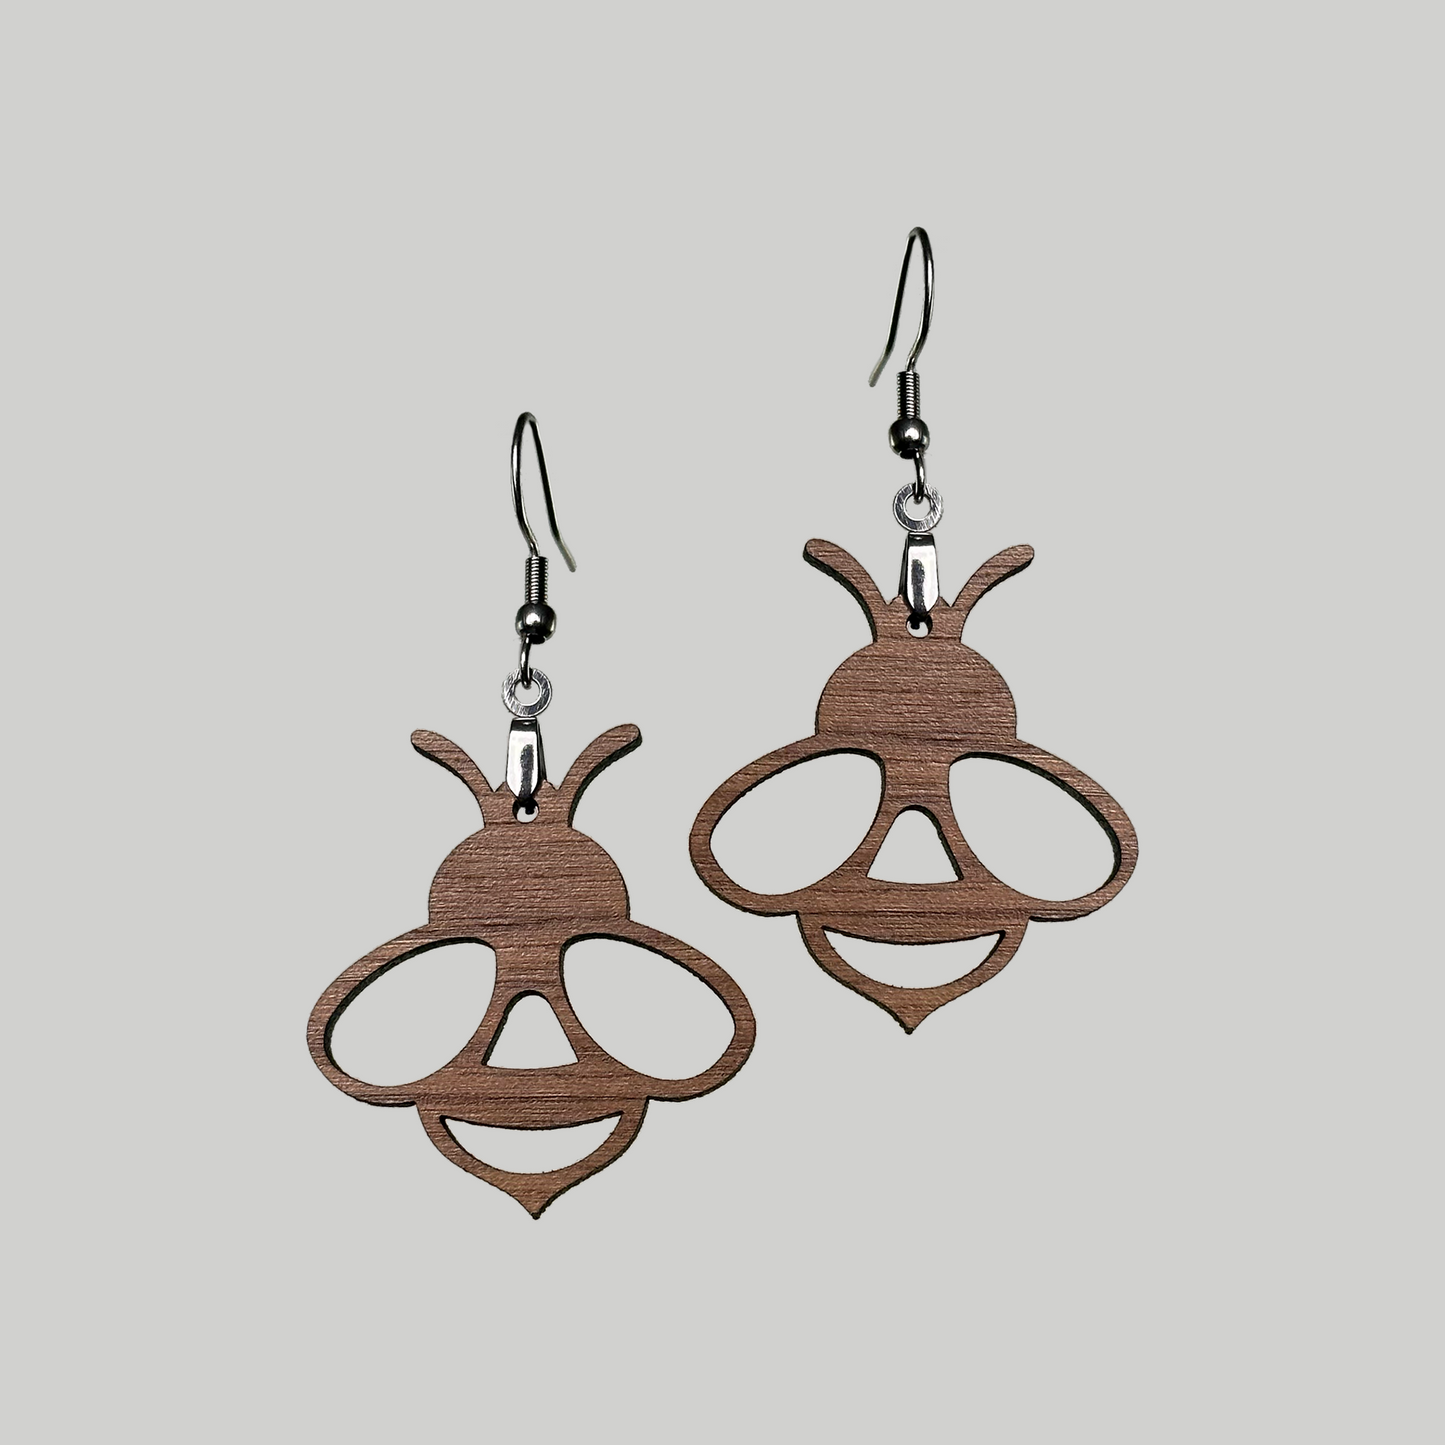 Bee Earrings: Sweet and stylish, these earrings showcase adorable bumble bee designs for a playful and nature-inspired look.